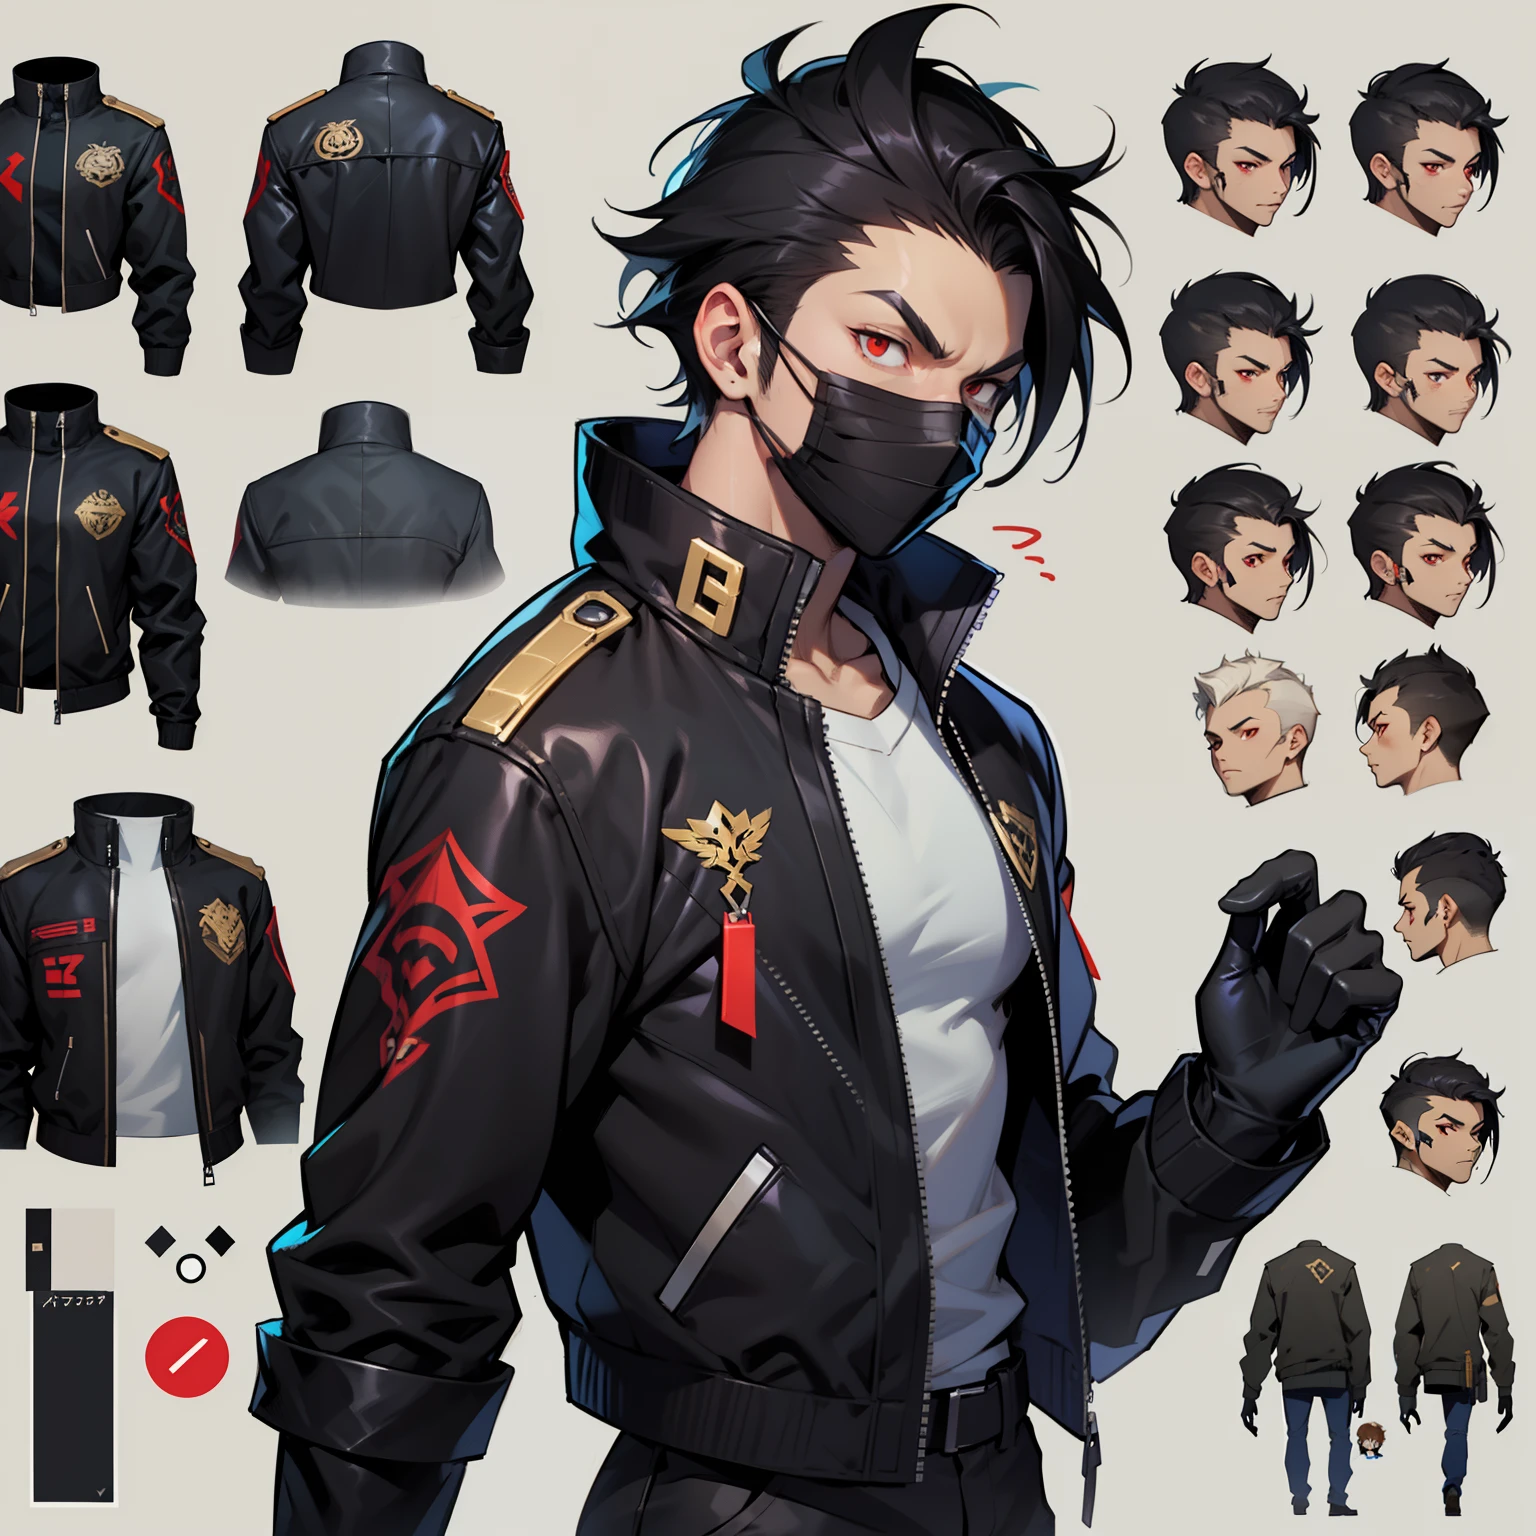 A man with a black jacket over a white shirt, black ClothMask , pushed back black hair , ((character concept art)), ((character design sheet, same character, front, side, back)) maple story character art, video game character design, video game character design, expert high detail concept art, metal bullet concept art, funny character design, Black pants ,BLACK MASK IN HIS MOUTH , BLACK JACKET OVER A WHITE SHIRT , PUSHED BACK HAIRCUT , black gloves , red eyes , Anime male style , BLACK MASK IN HIS MOUTH , BLACK JACKET OVER A WHITE T-SHIRT  , PUSHED BACK HAIRCUT, RED EYES , black gloves